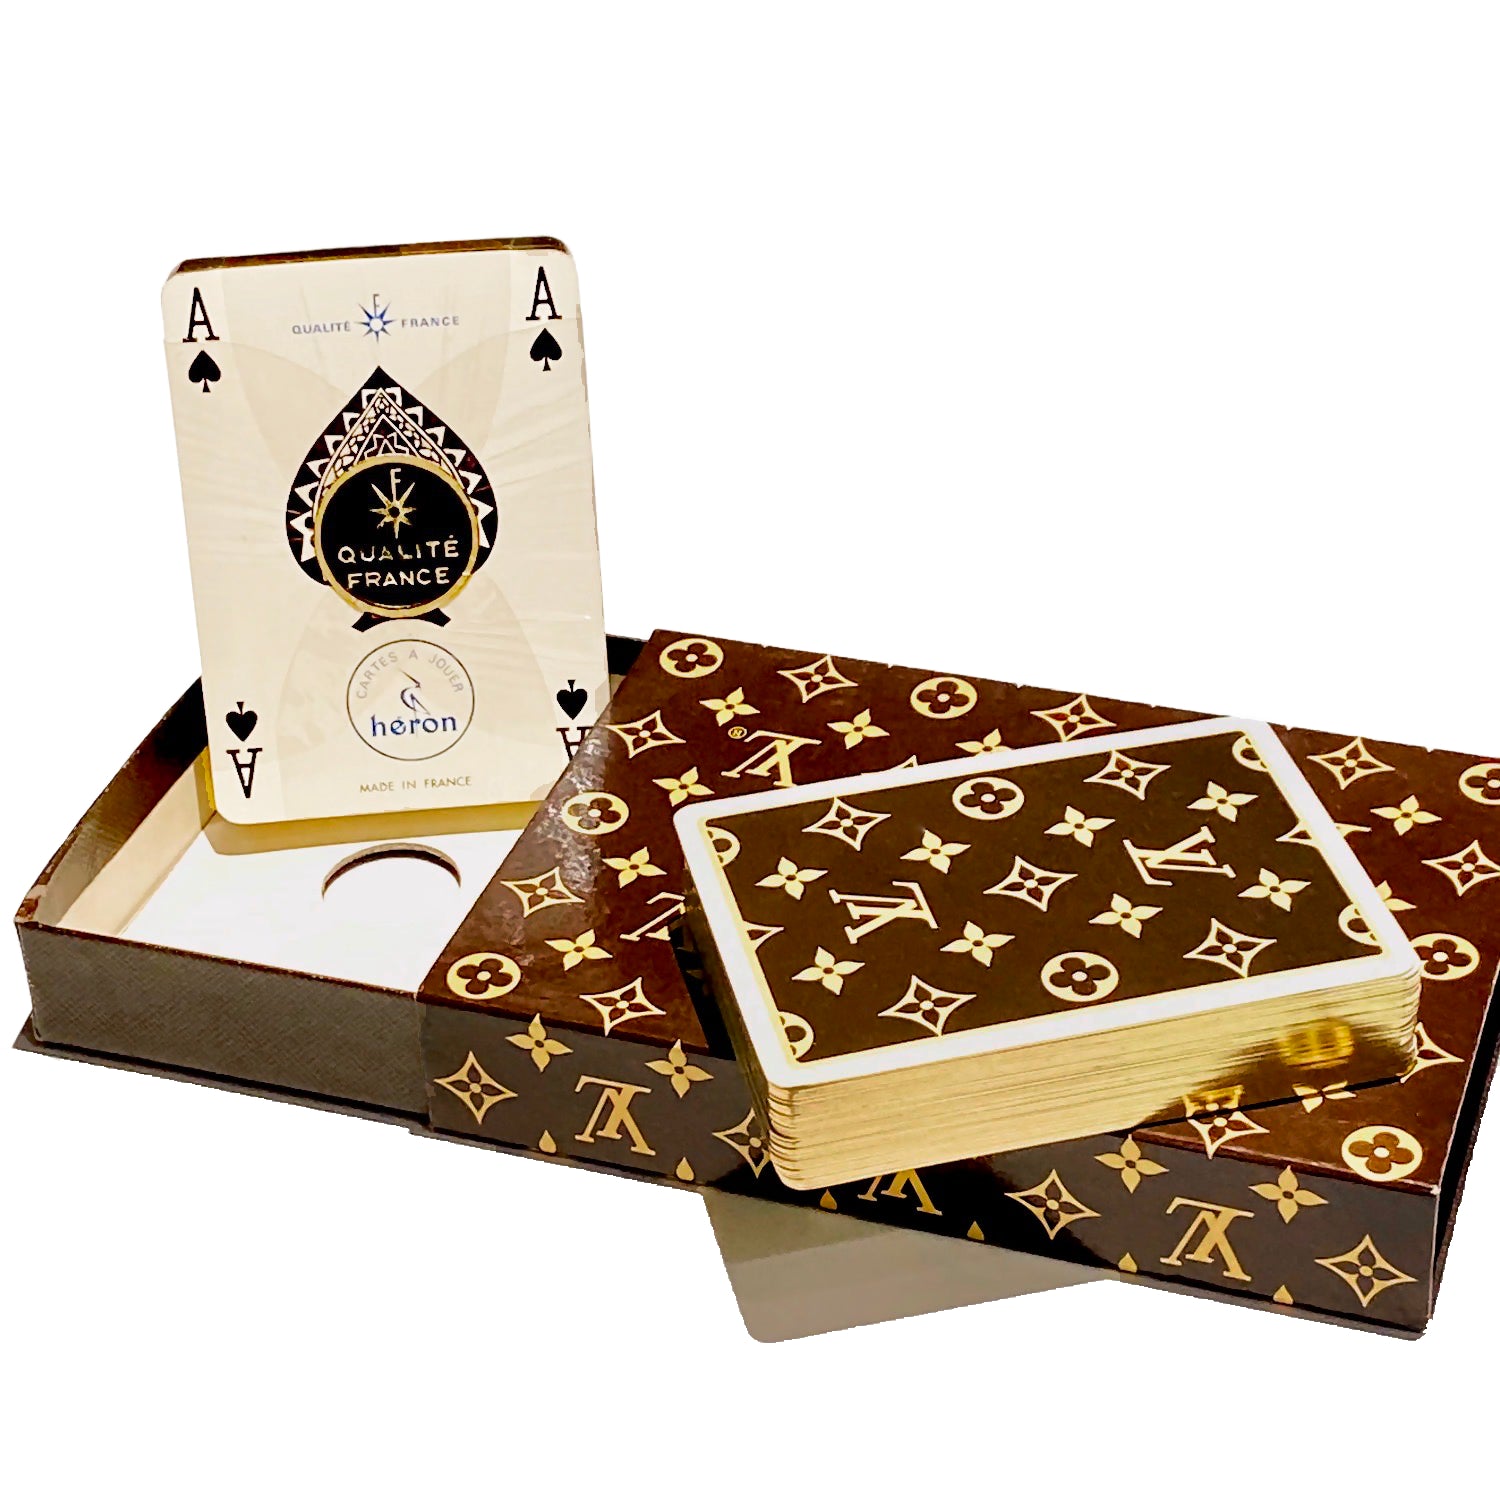 Te Plus Te Two sets of Louis Vuitton vintage playing cards with monogram motif and gilt edges. Includes box and bridge contrat card.